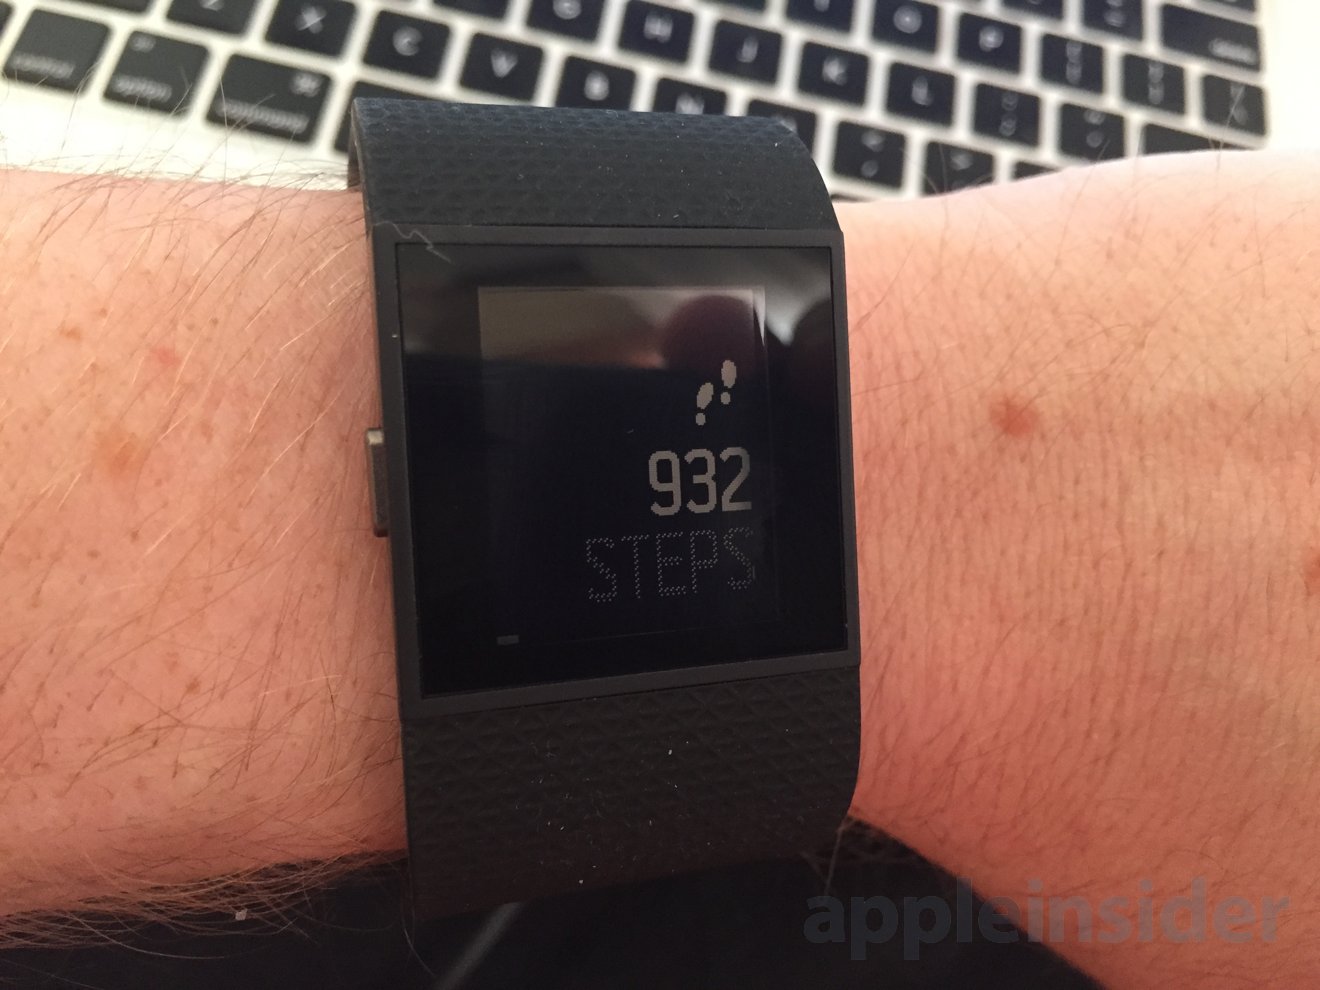 First look: Fitbit Surge, a fitness tracking, heart rate monitoring ...